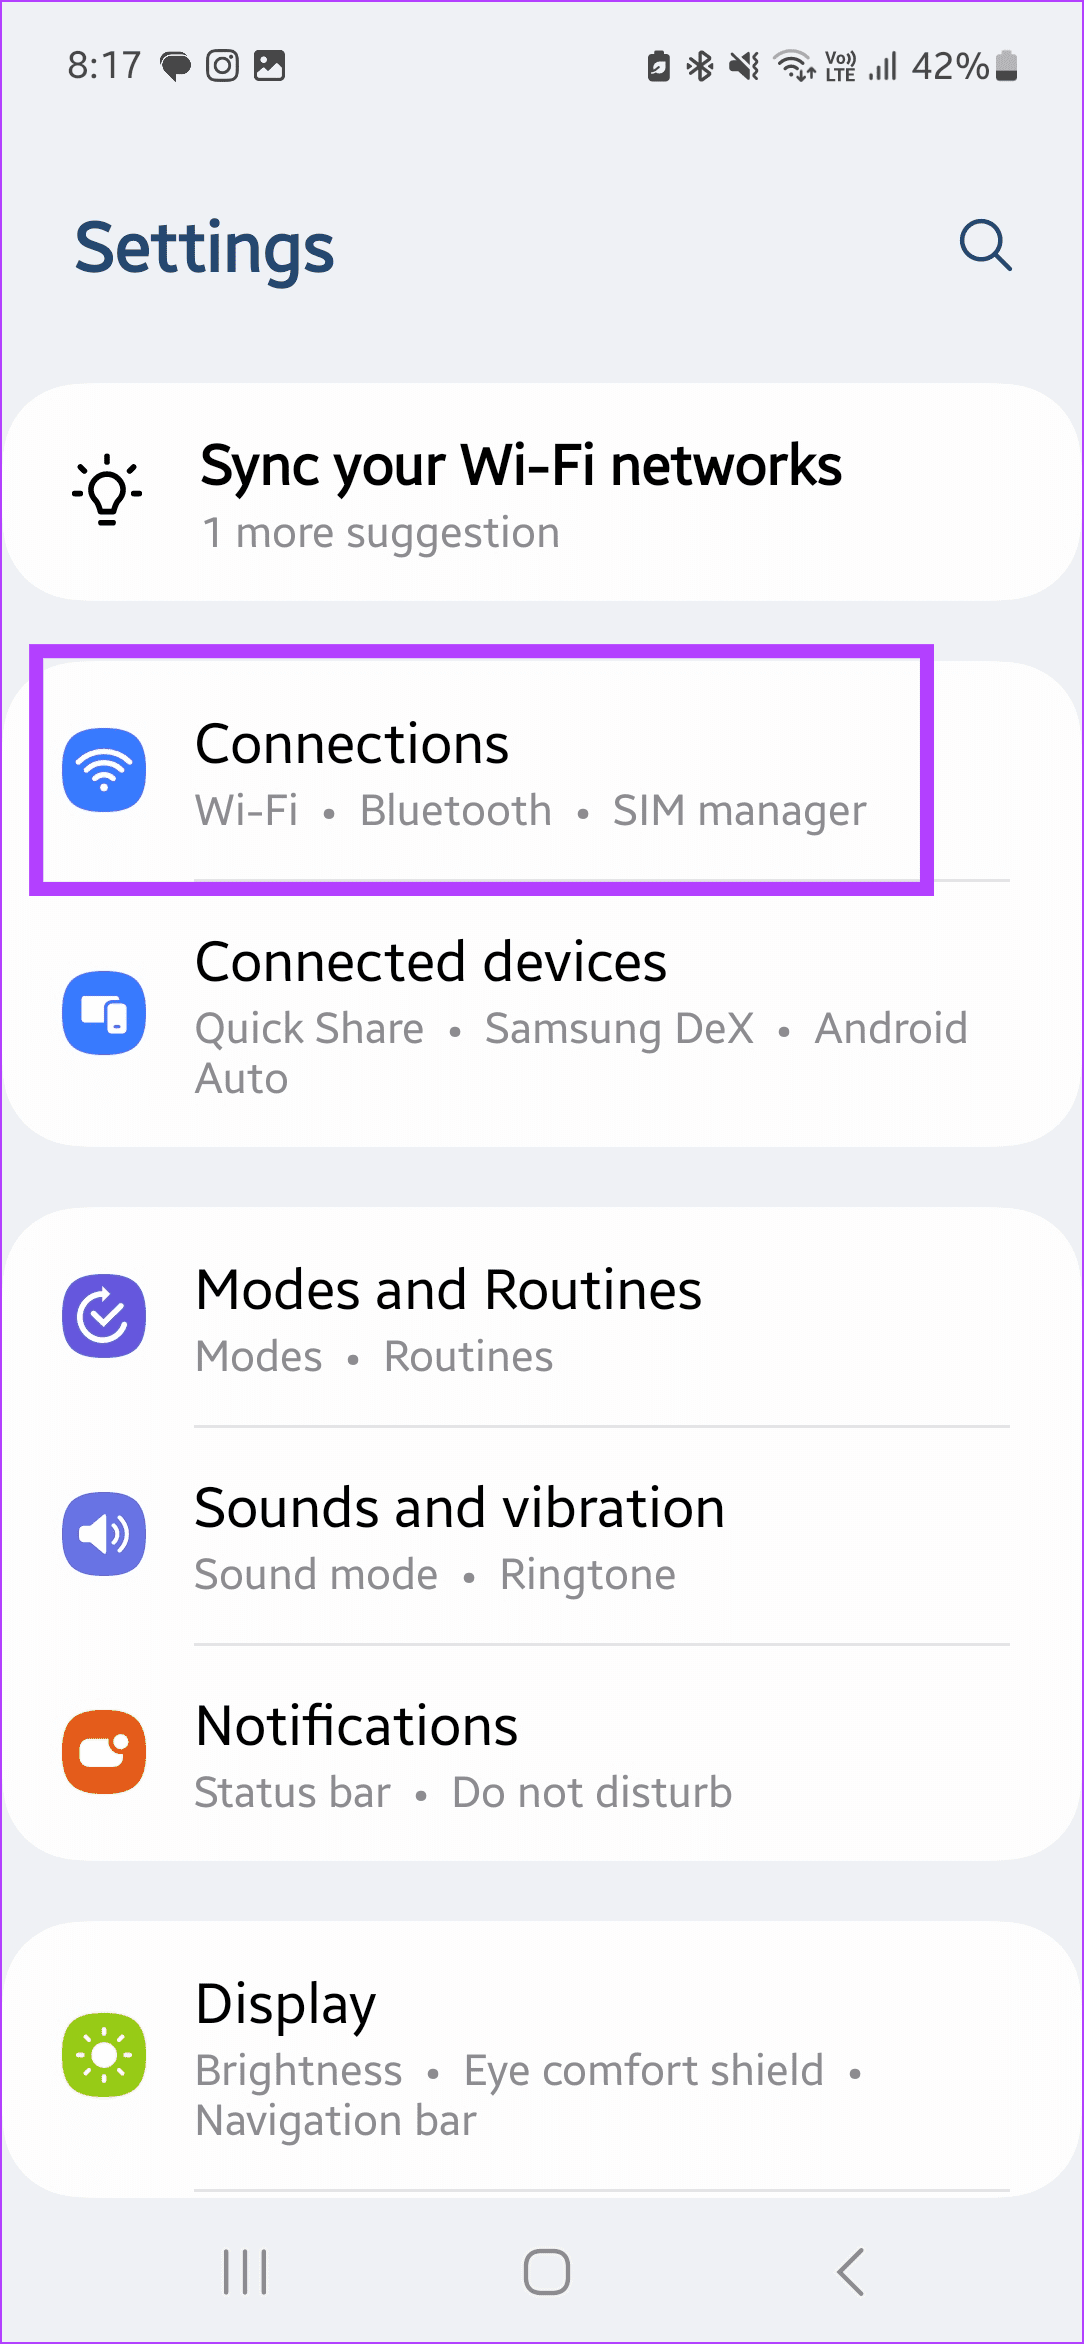 Tap on Connections